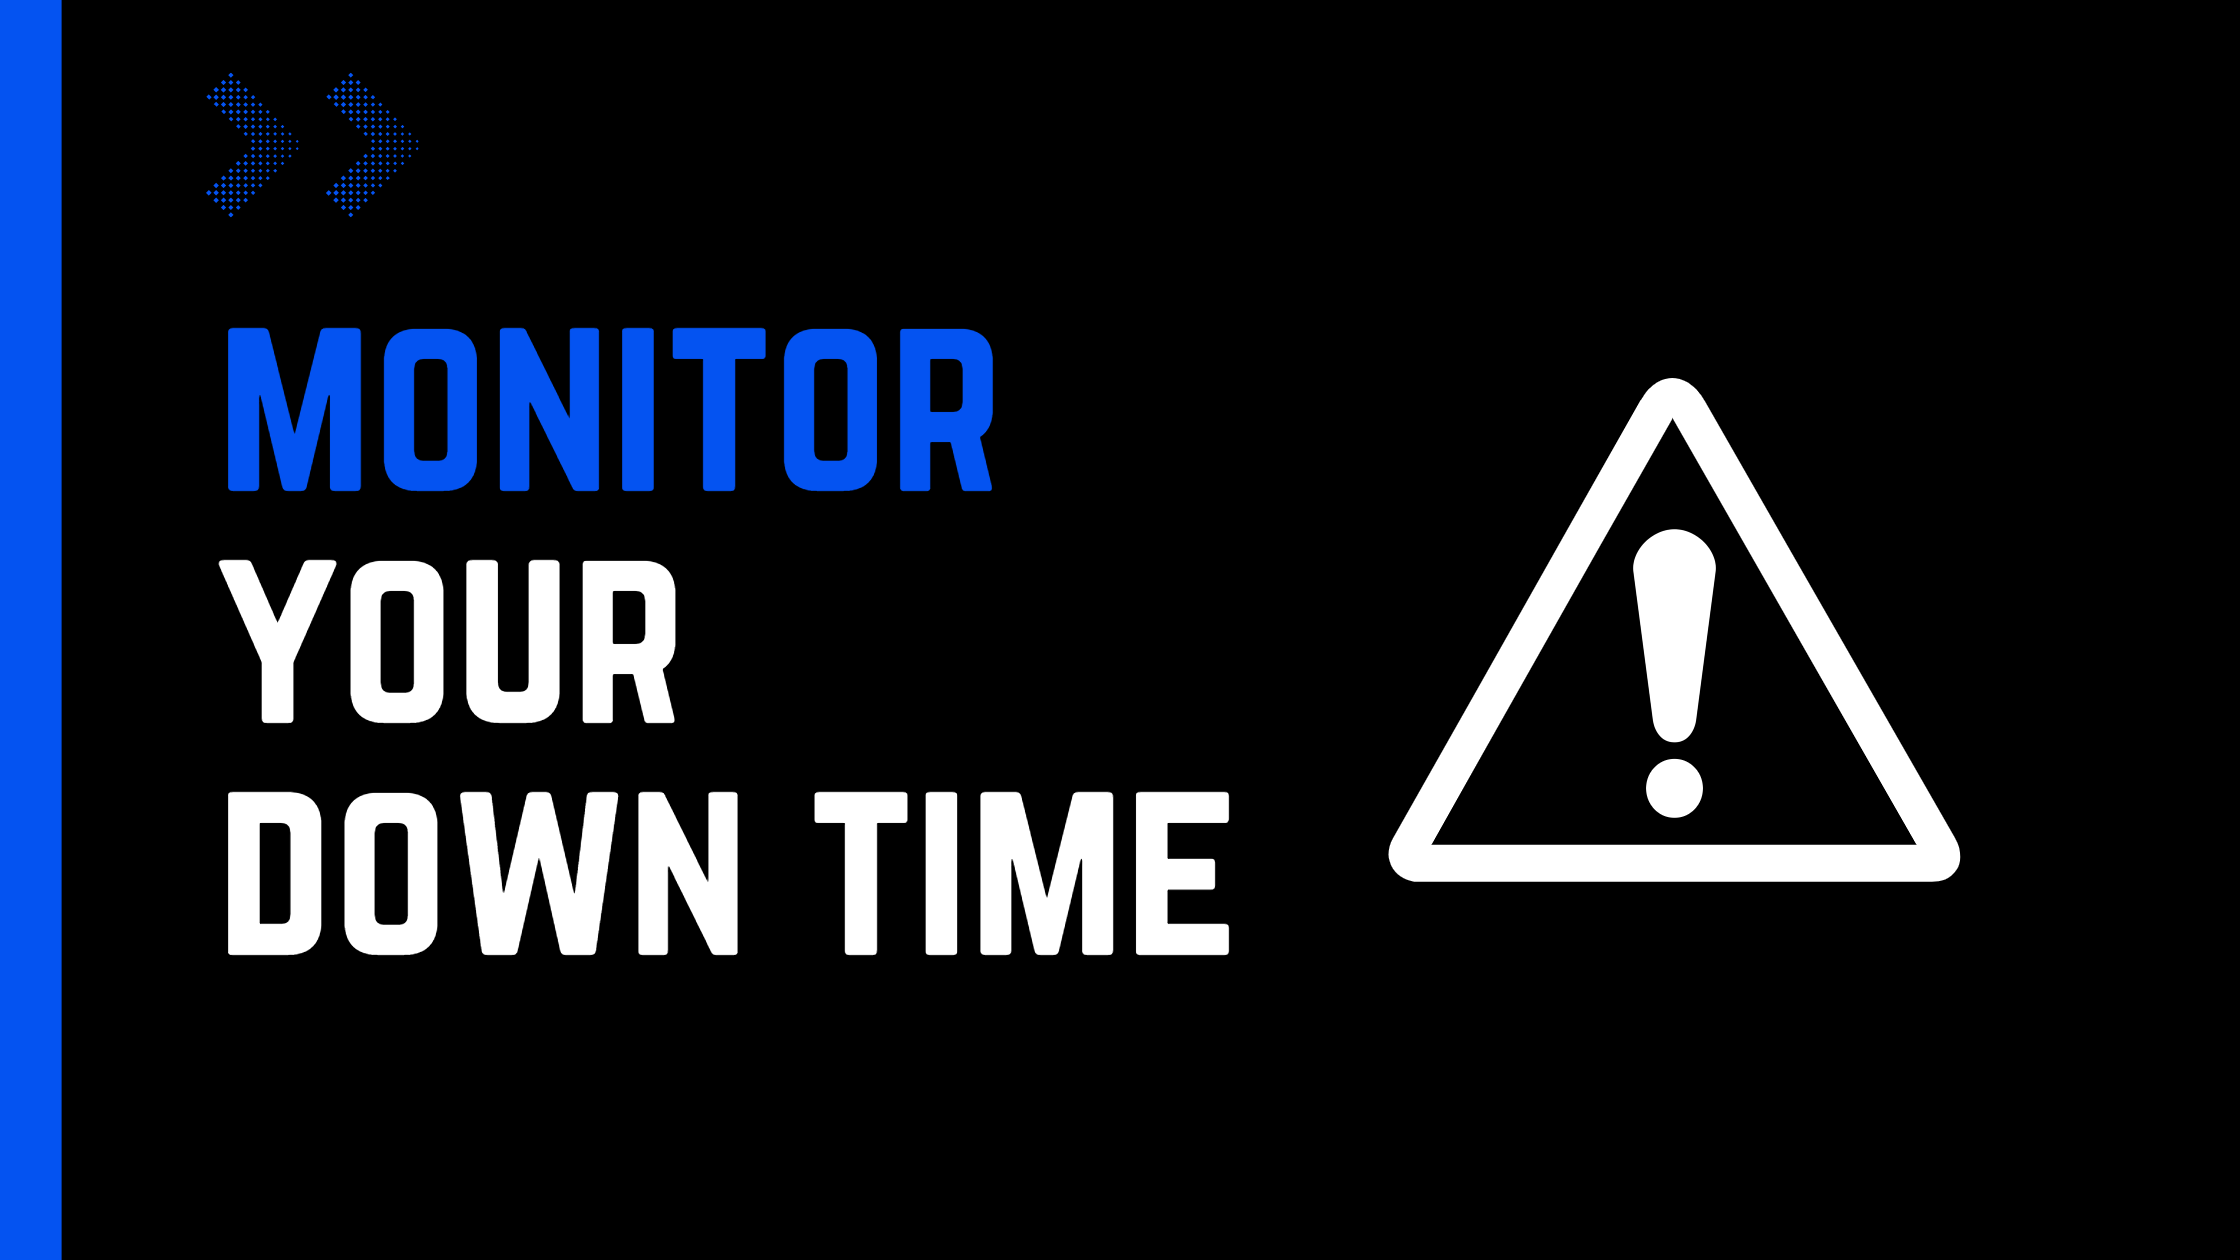 Set up UptimeRobot monitors to check for site downtime